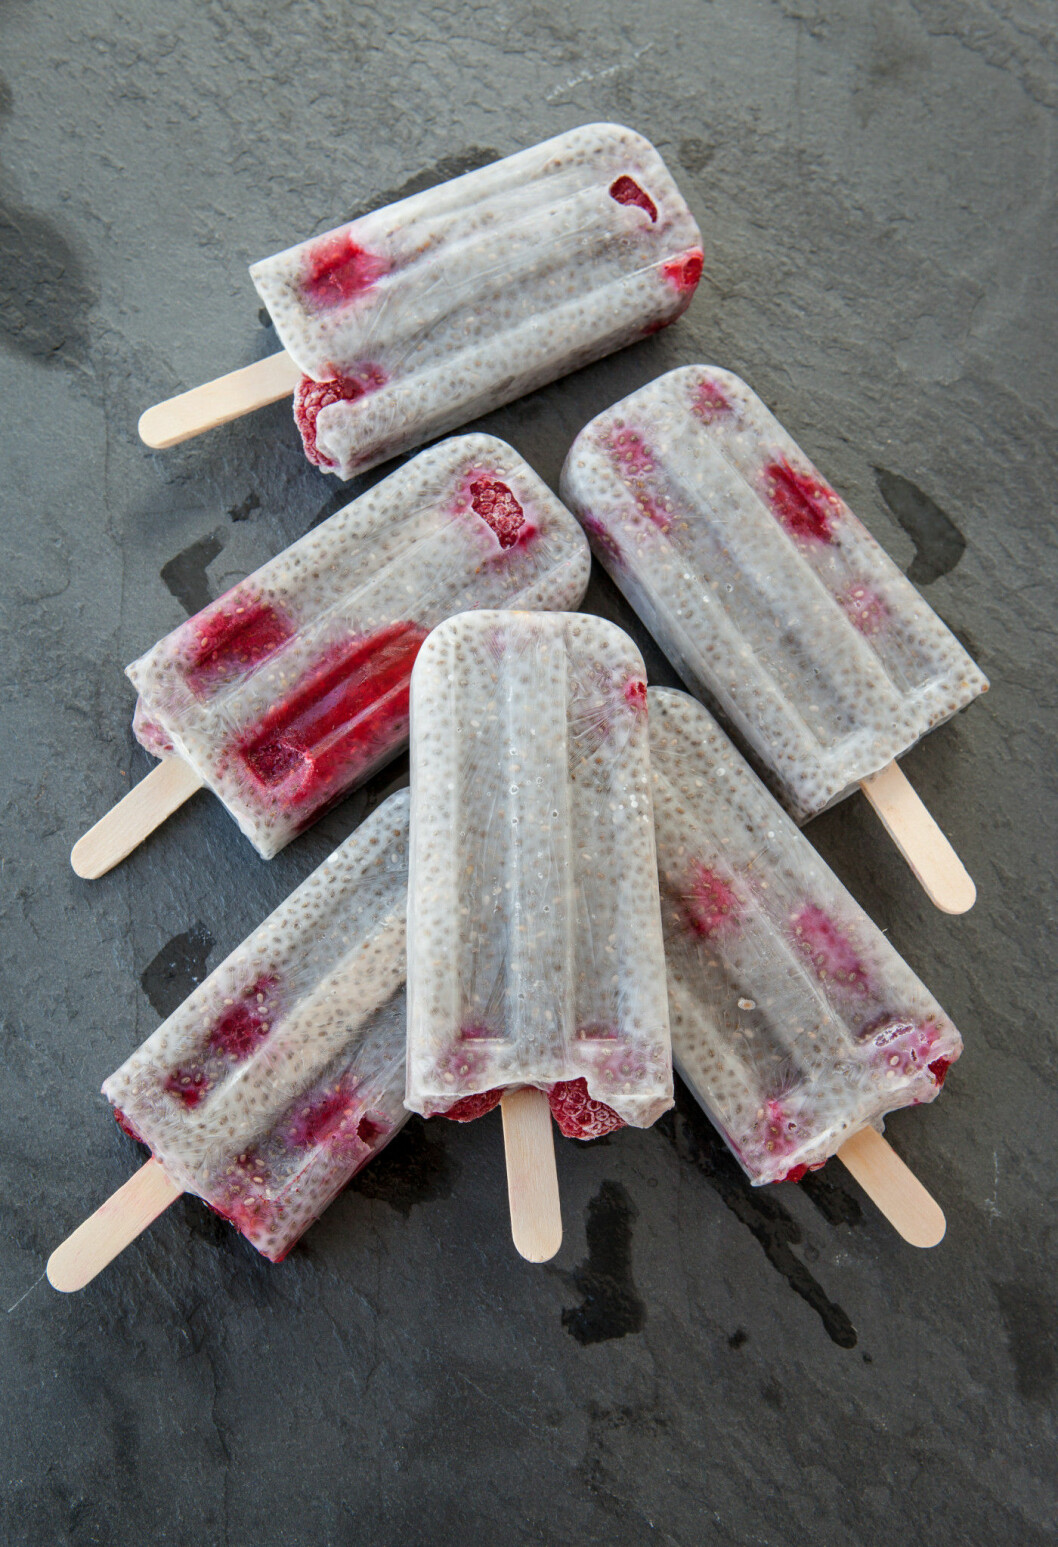 Homemade frozen popsicles with chia seeds and raspberries